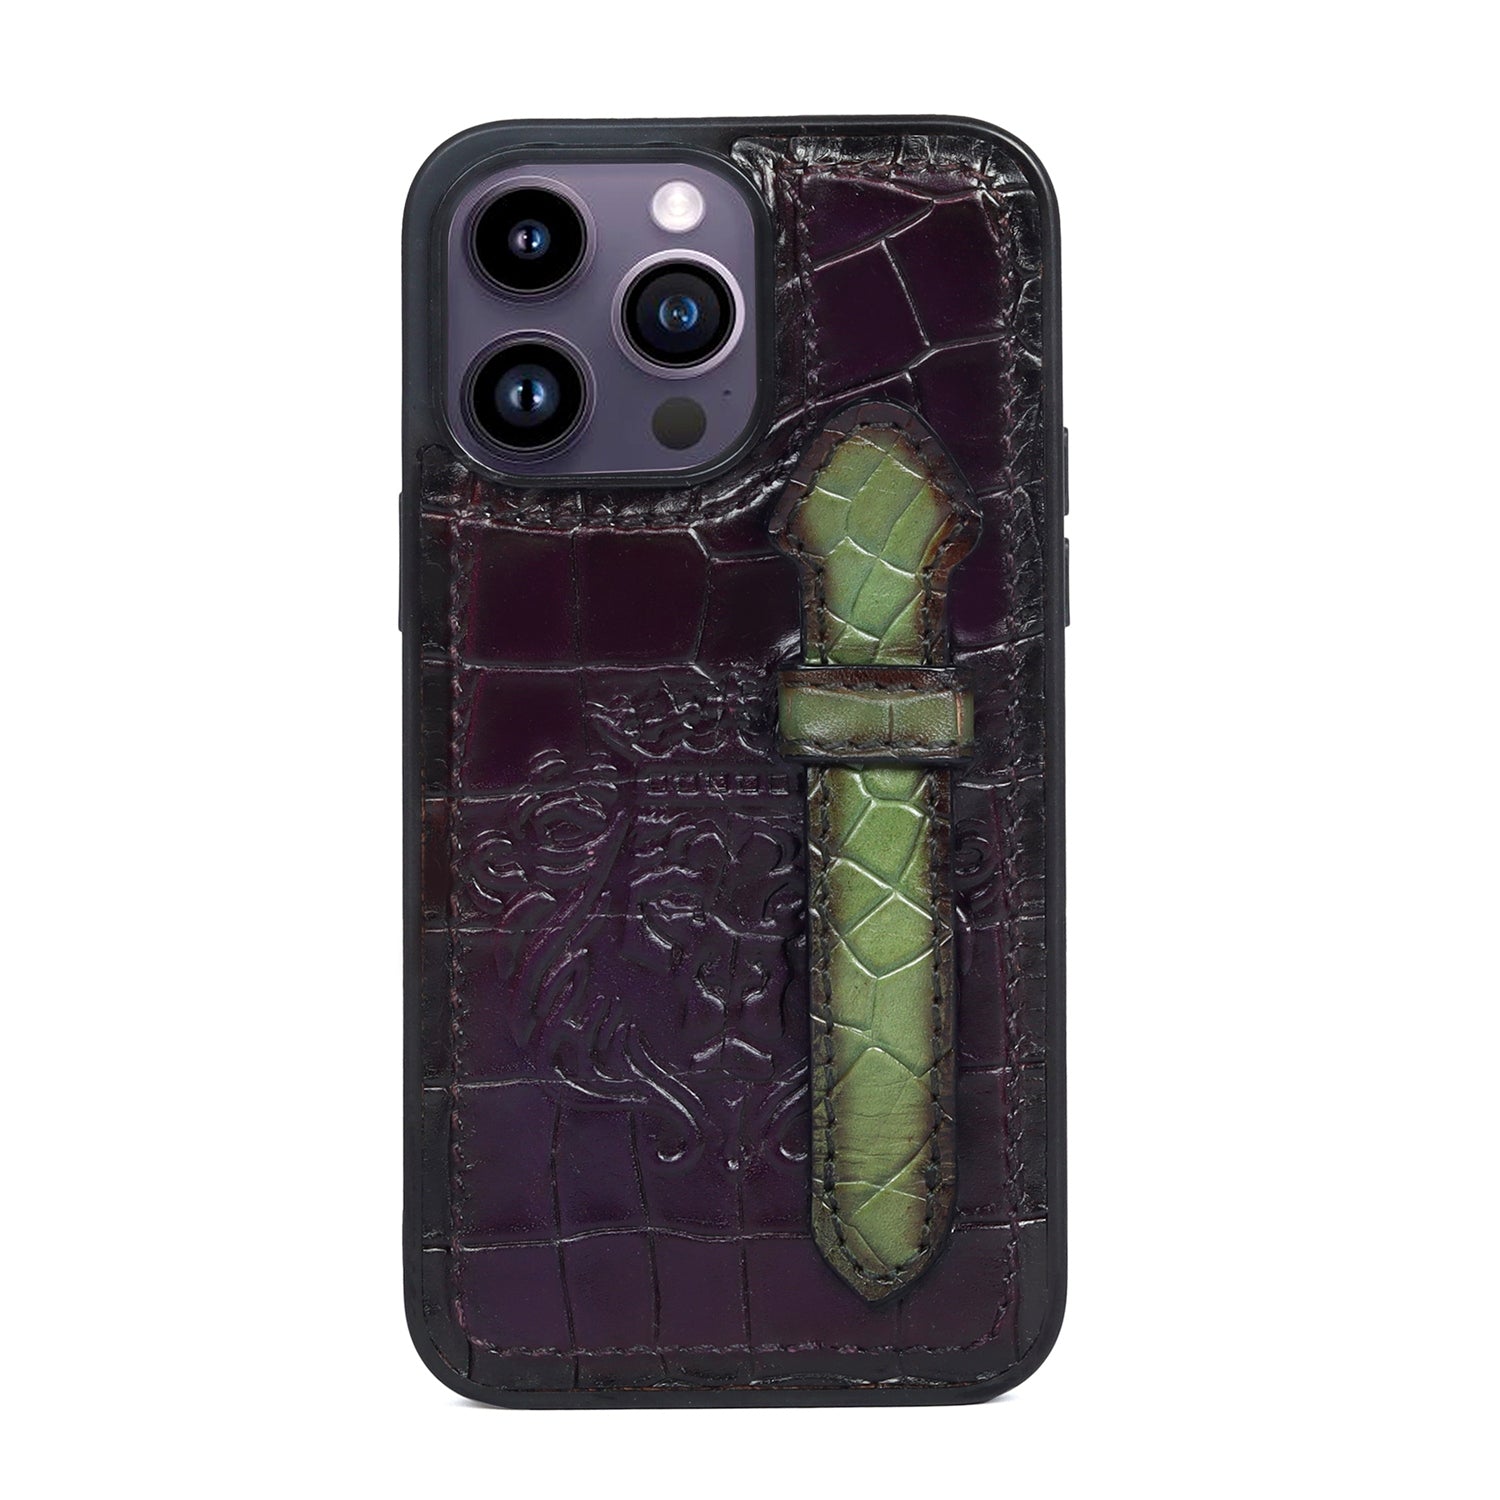 Purple Leather Mobile Cover in Deep Cut With Green Holding Finger strap By Brune & Bareskin